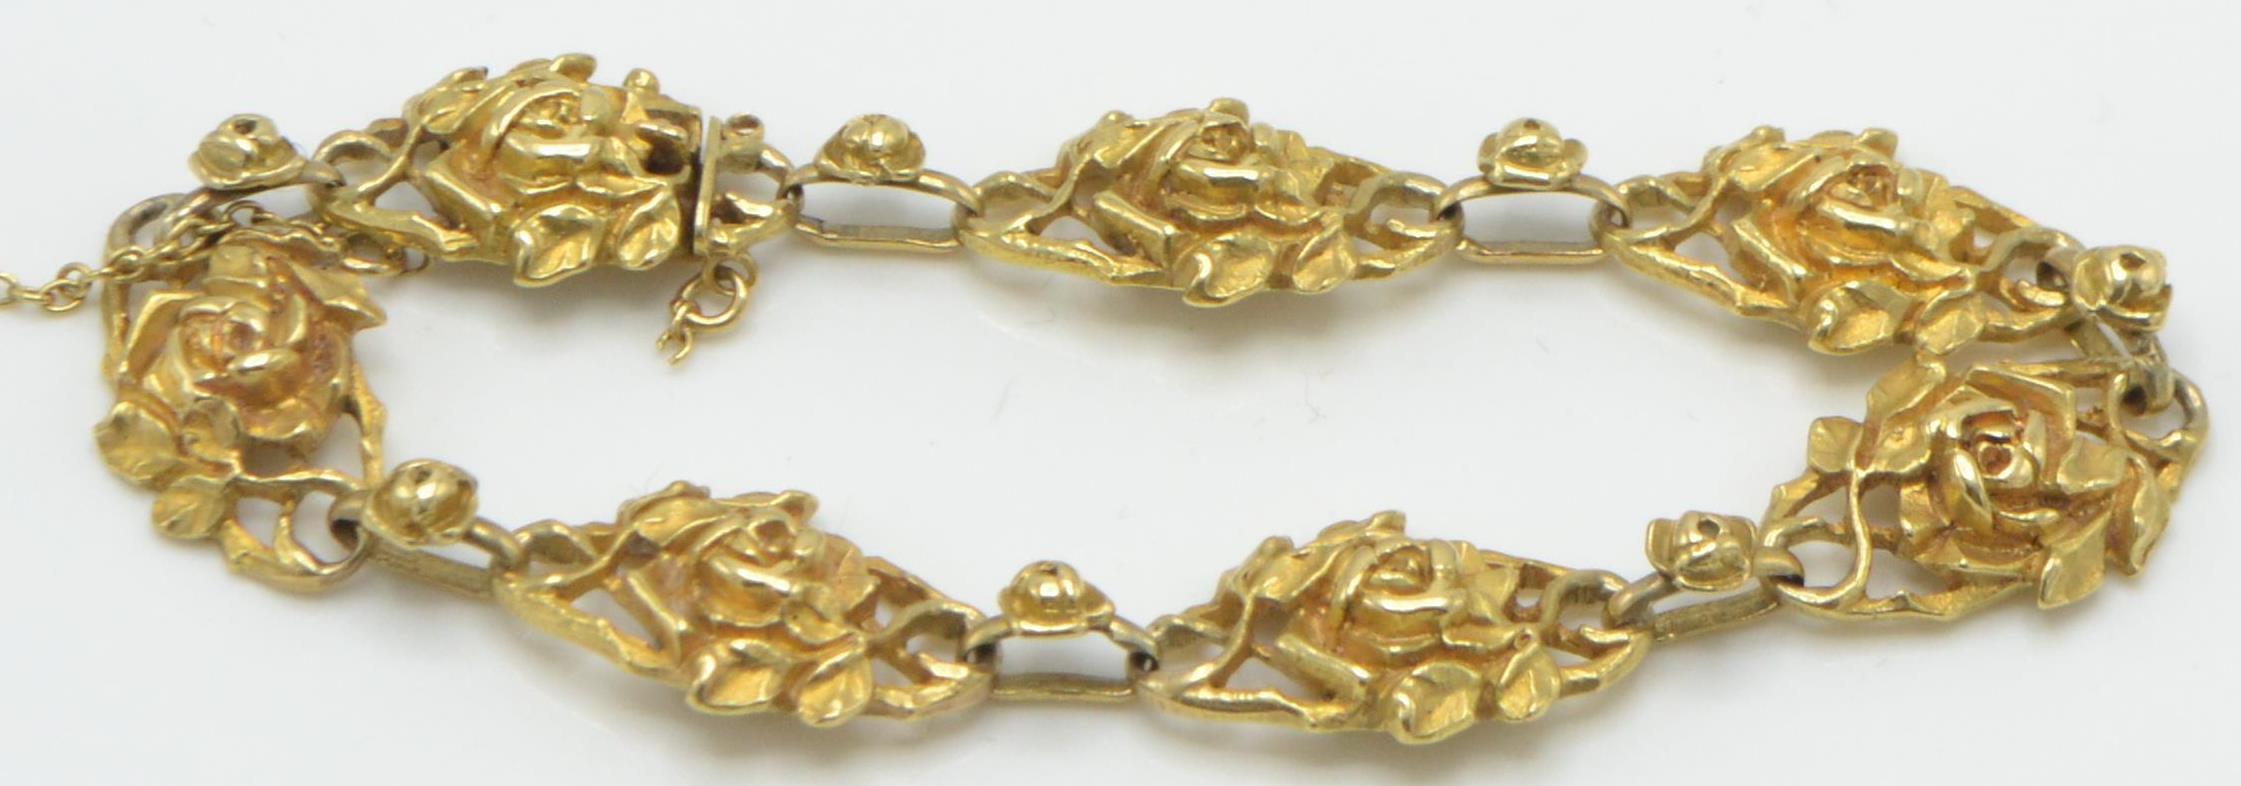 A French gold Art Nouveau seven link bracelet. The bracelet form of openwork links in the form of - Image 2 of 8